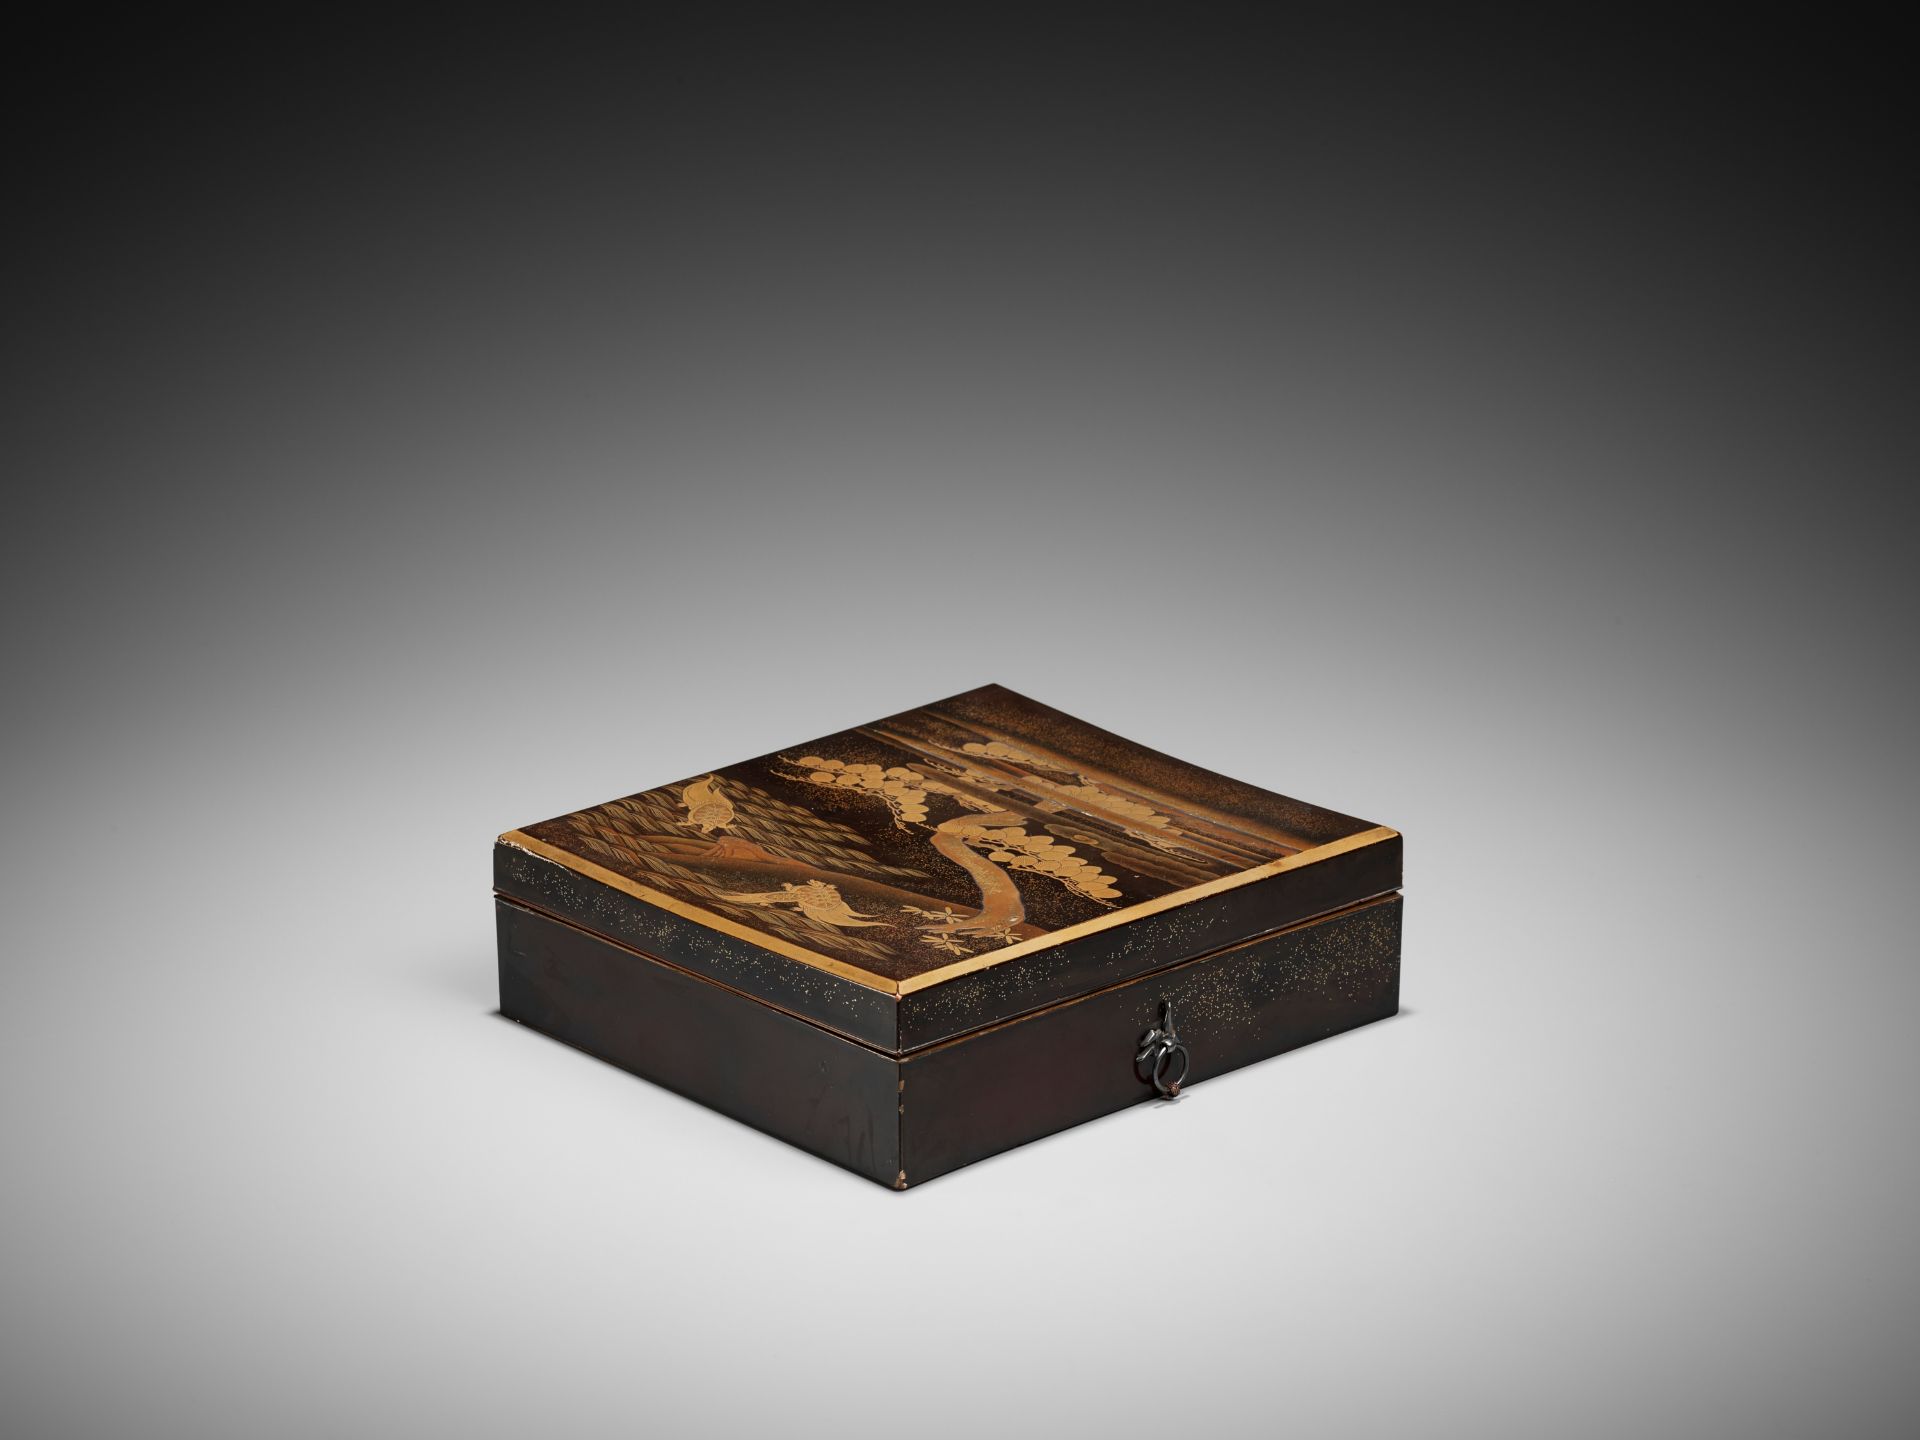 A LACQUER BOX AND COVER WITH MINOGAME DESIGN - Image 2 of 10